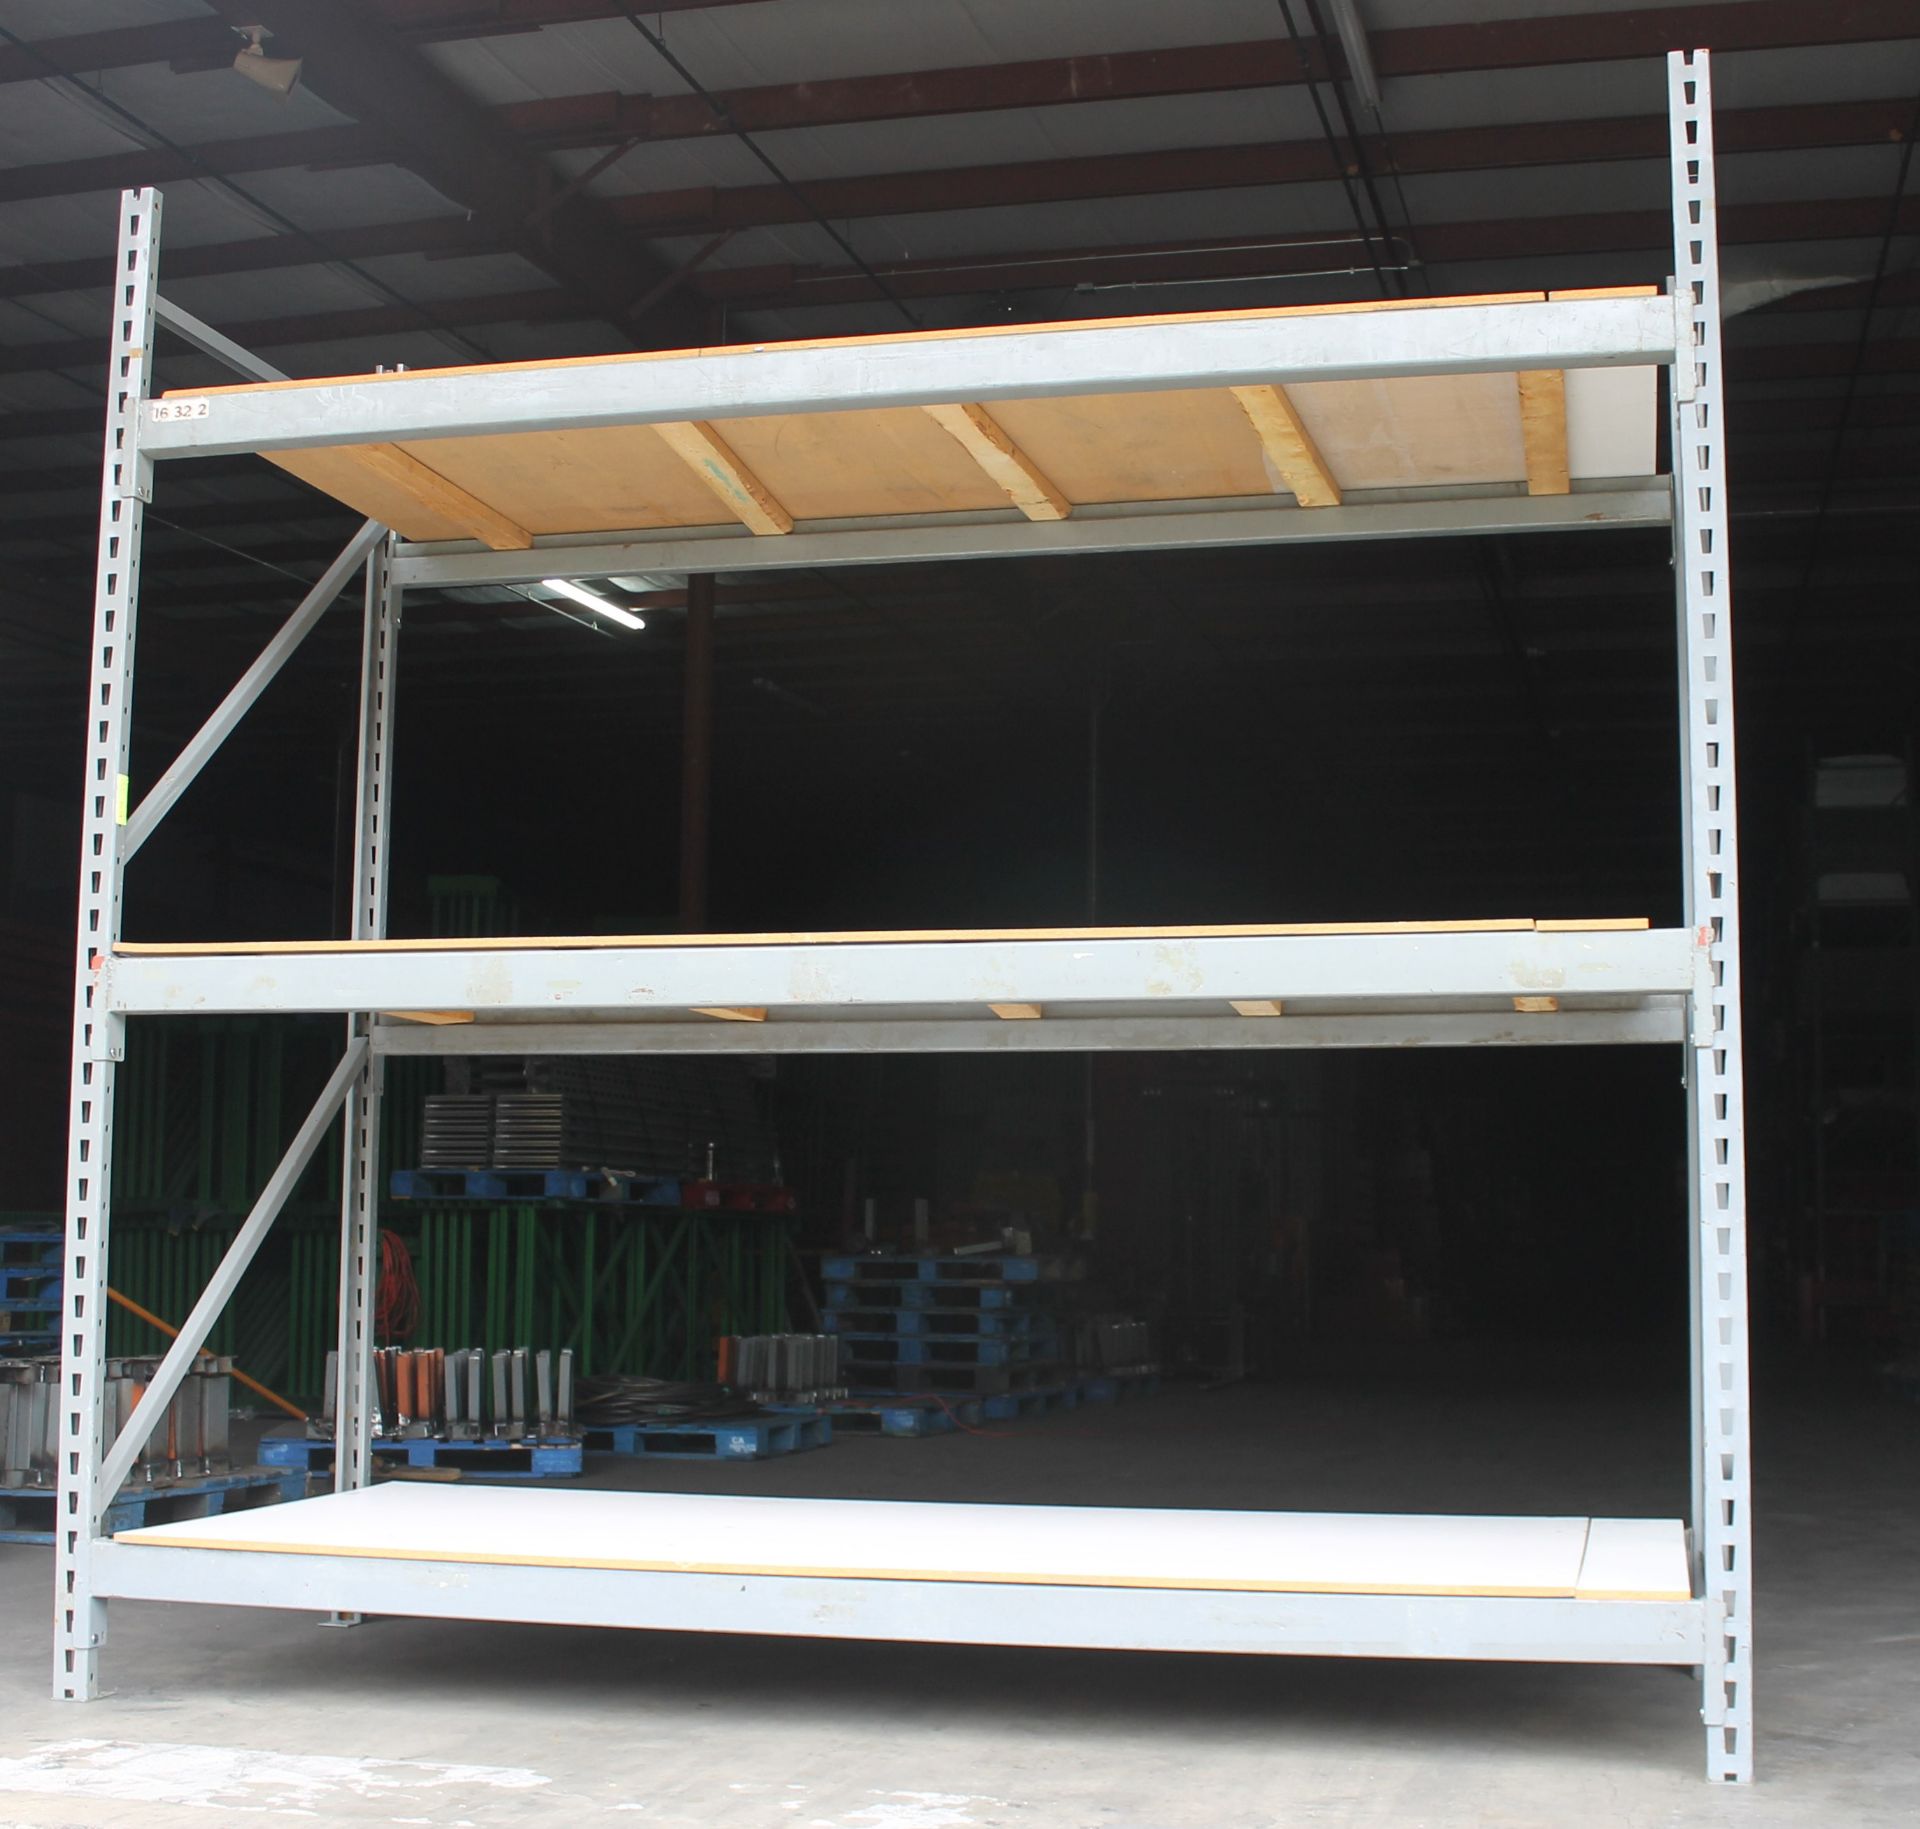 14 BAYS OF 120"H X 48"D X 117"L INDUSTRIAL SHELVING WITH LAMINATED WOOD DECKING, - Image 2 of 4